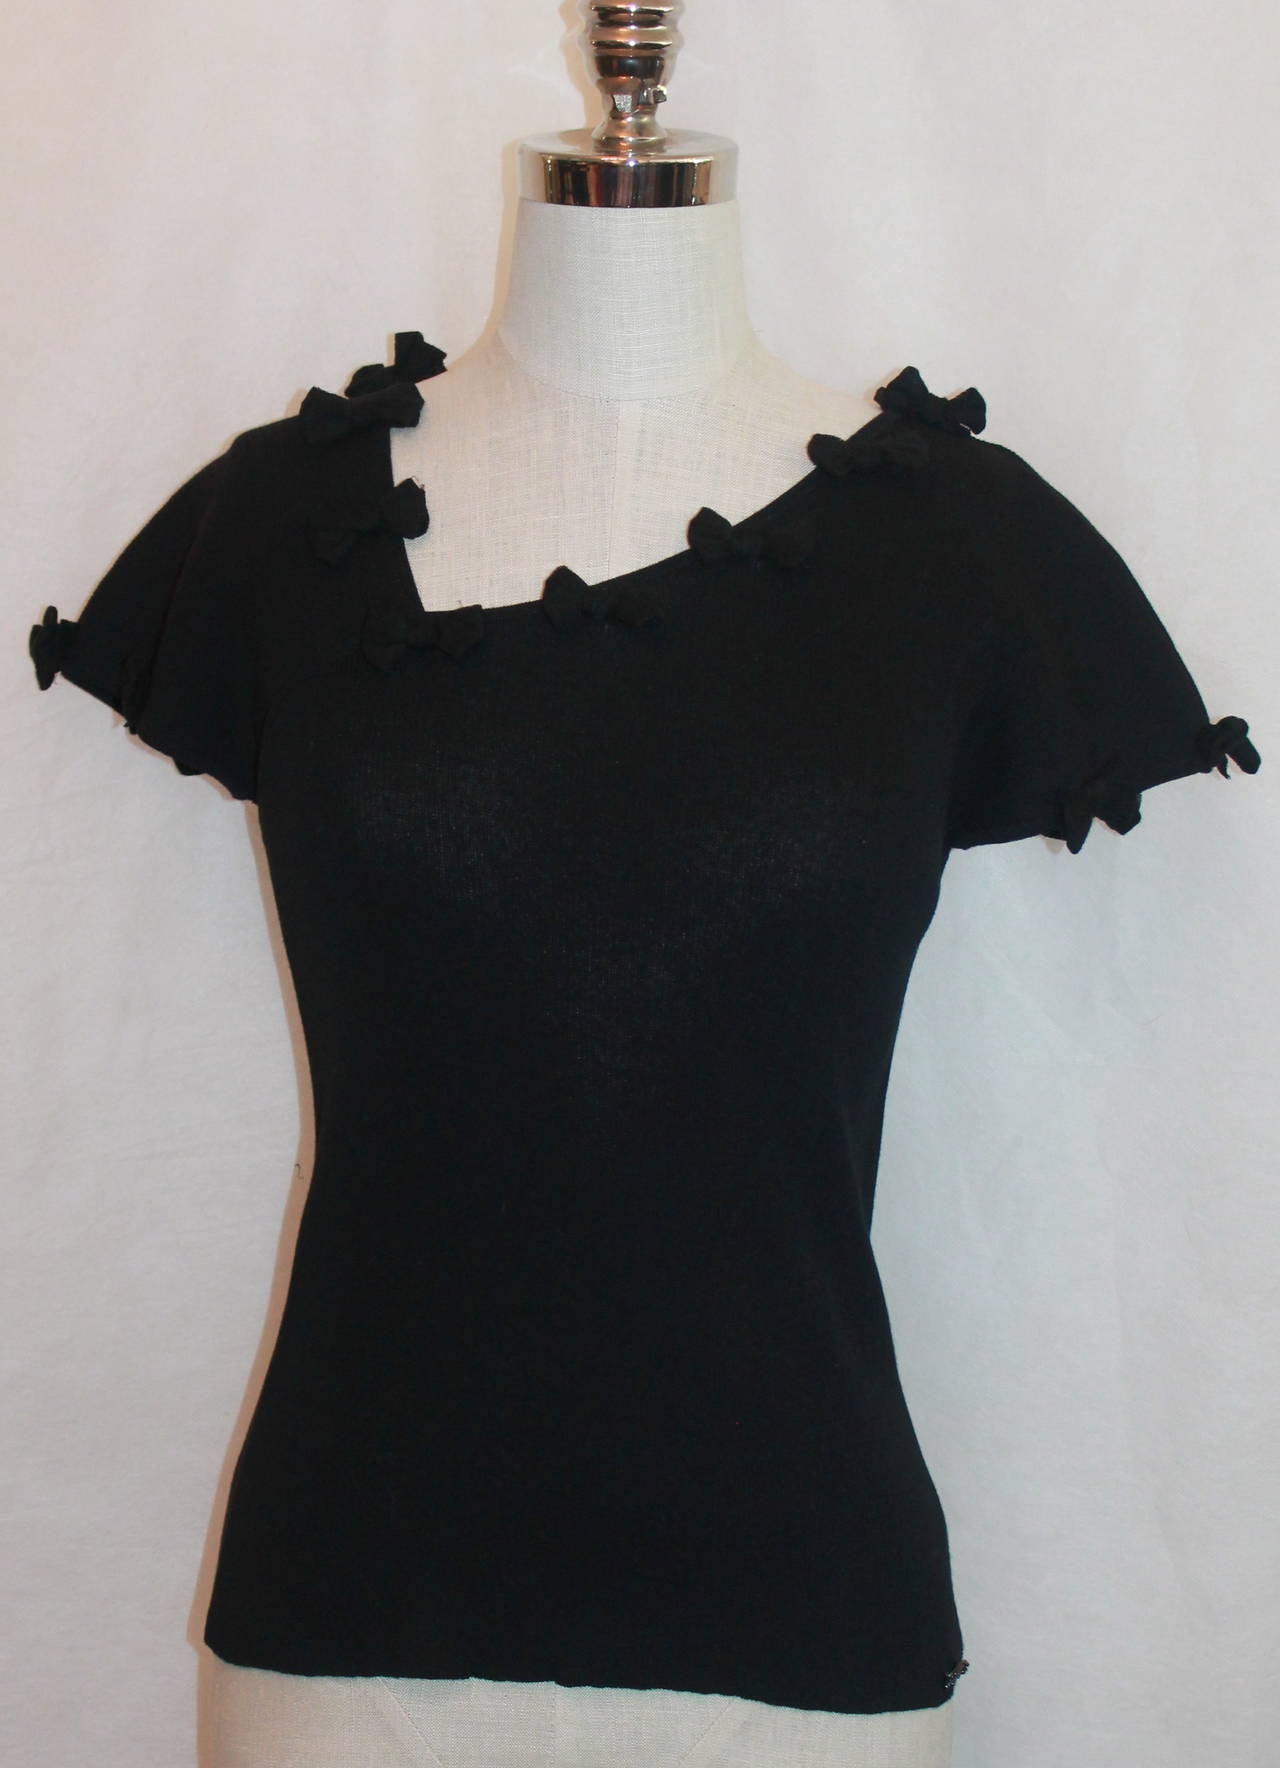 Chanel 1999 Vintage Black Shirt with Small Bow Details - 40. This shirt is in very good condition and is a knitted cotton blend. The bows are on the neckline and sleeves. 

Measurements:
Bust- 29